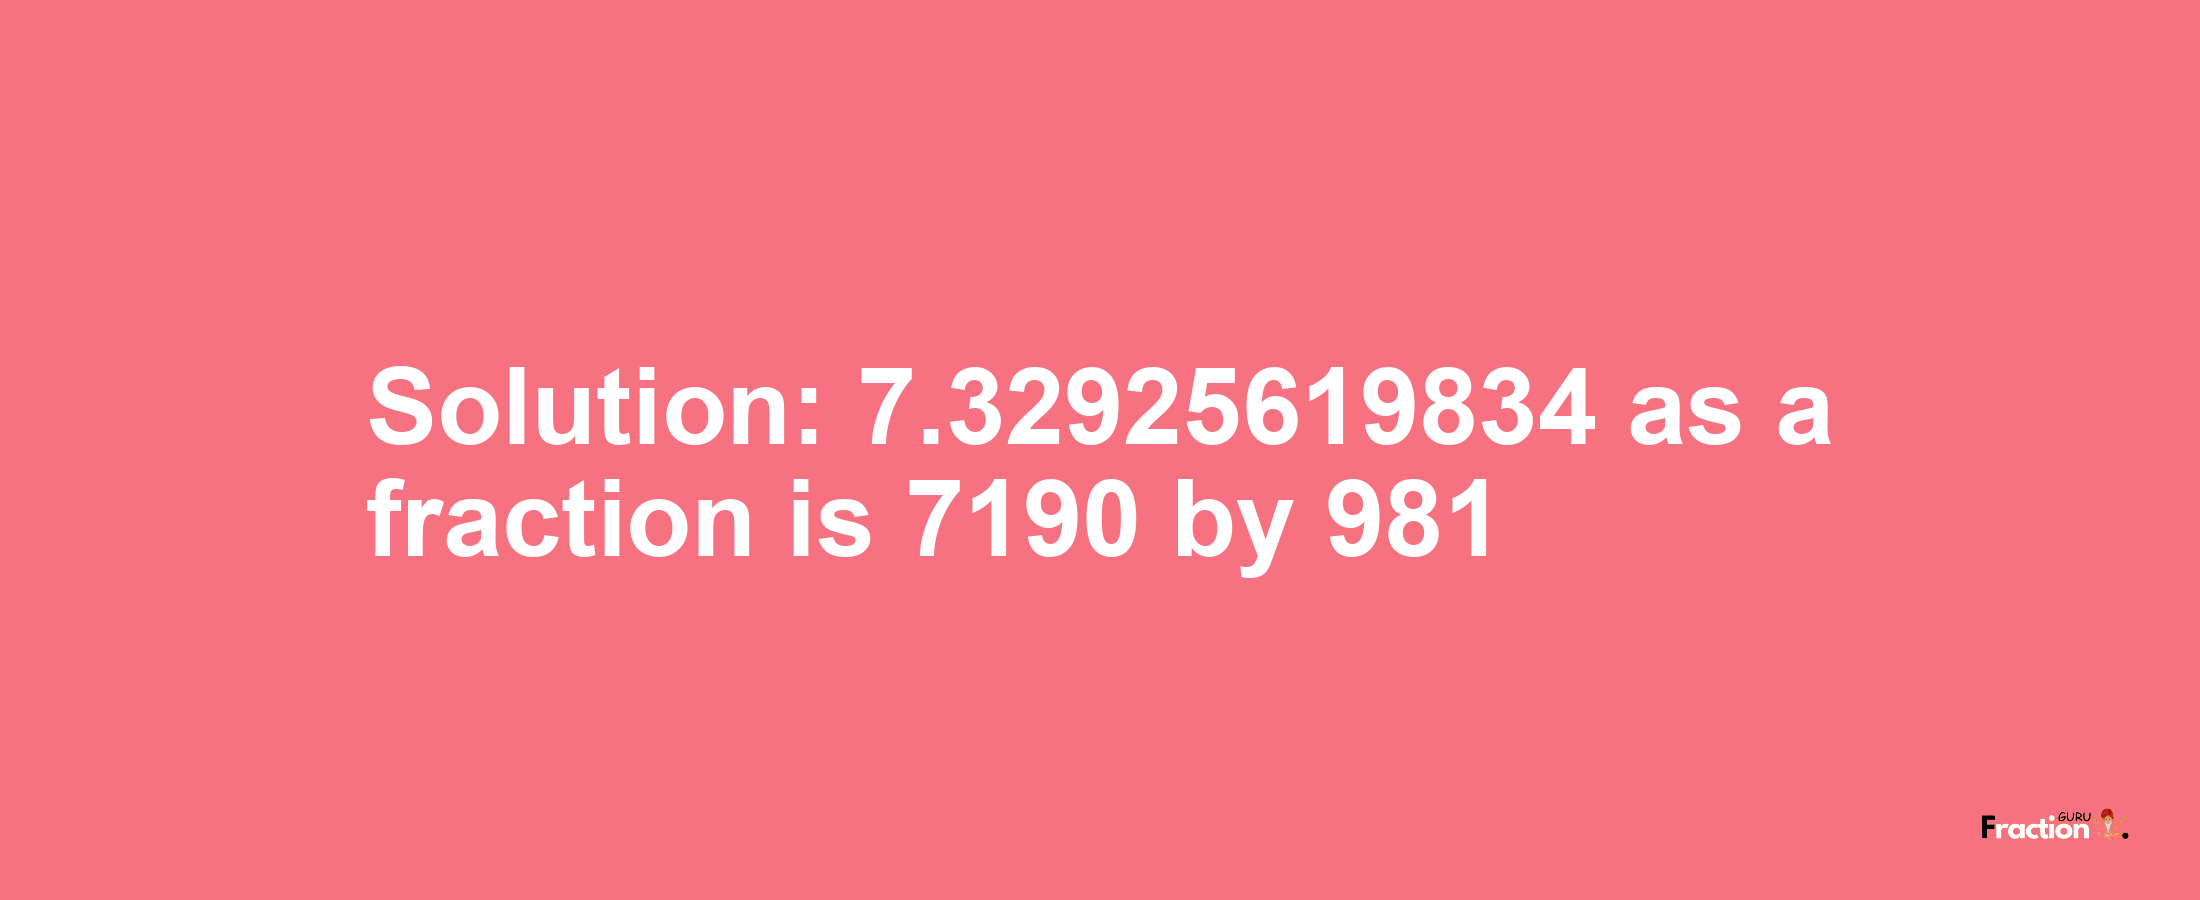 Solution:7.32925619834 as a fraction is 7190/981